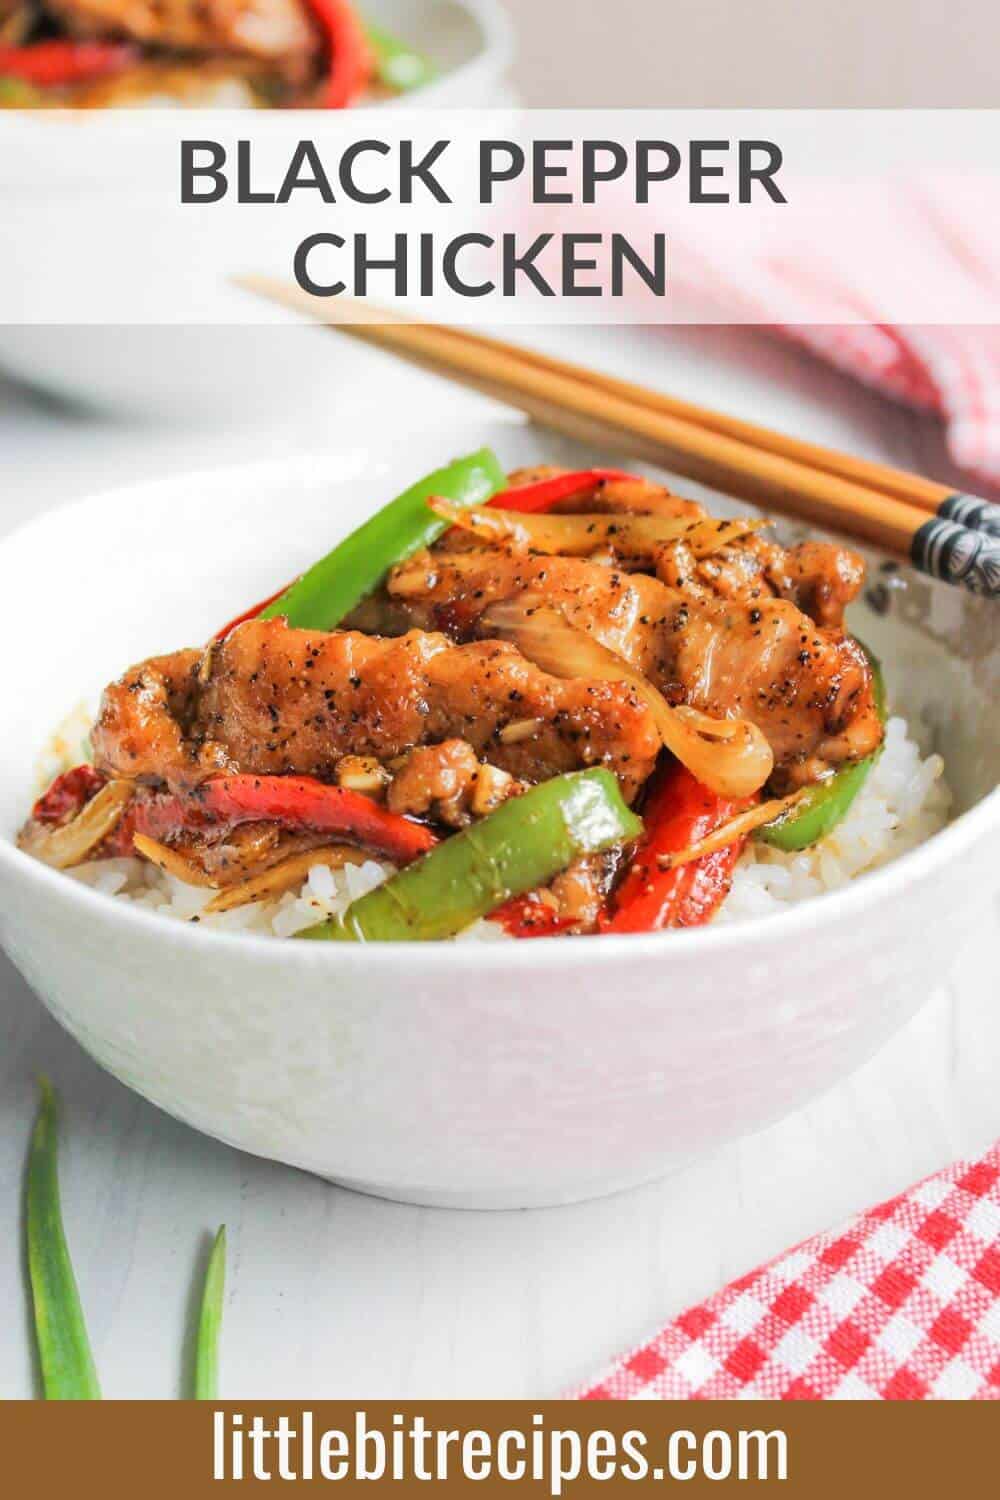 Black pepper chicken with text.